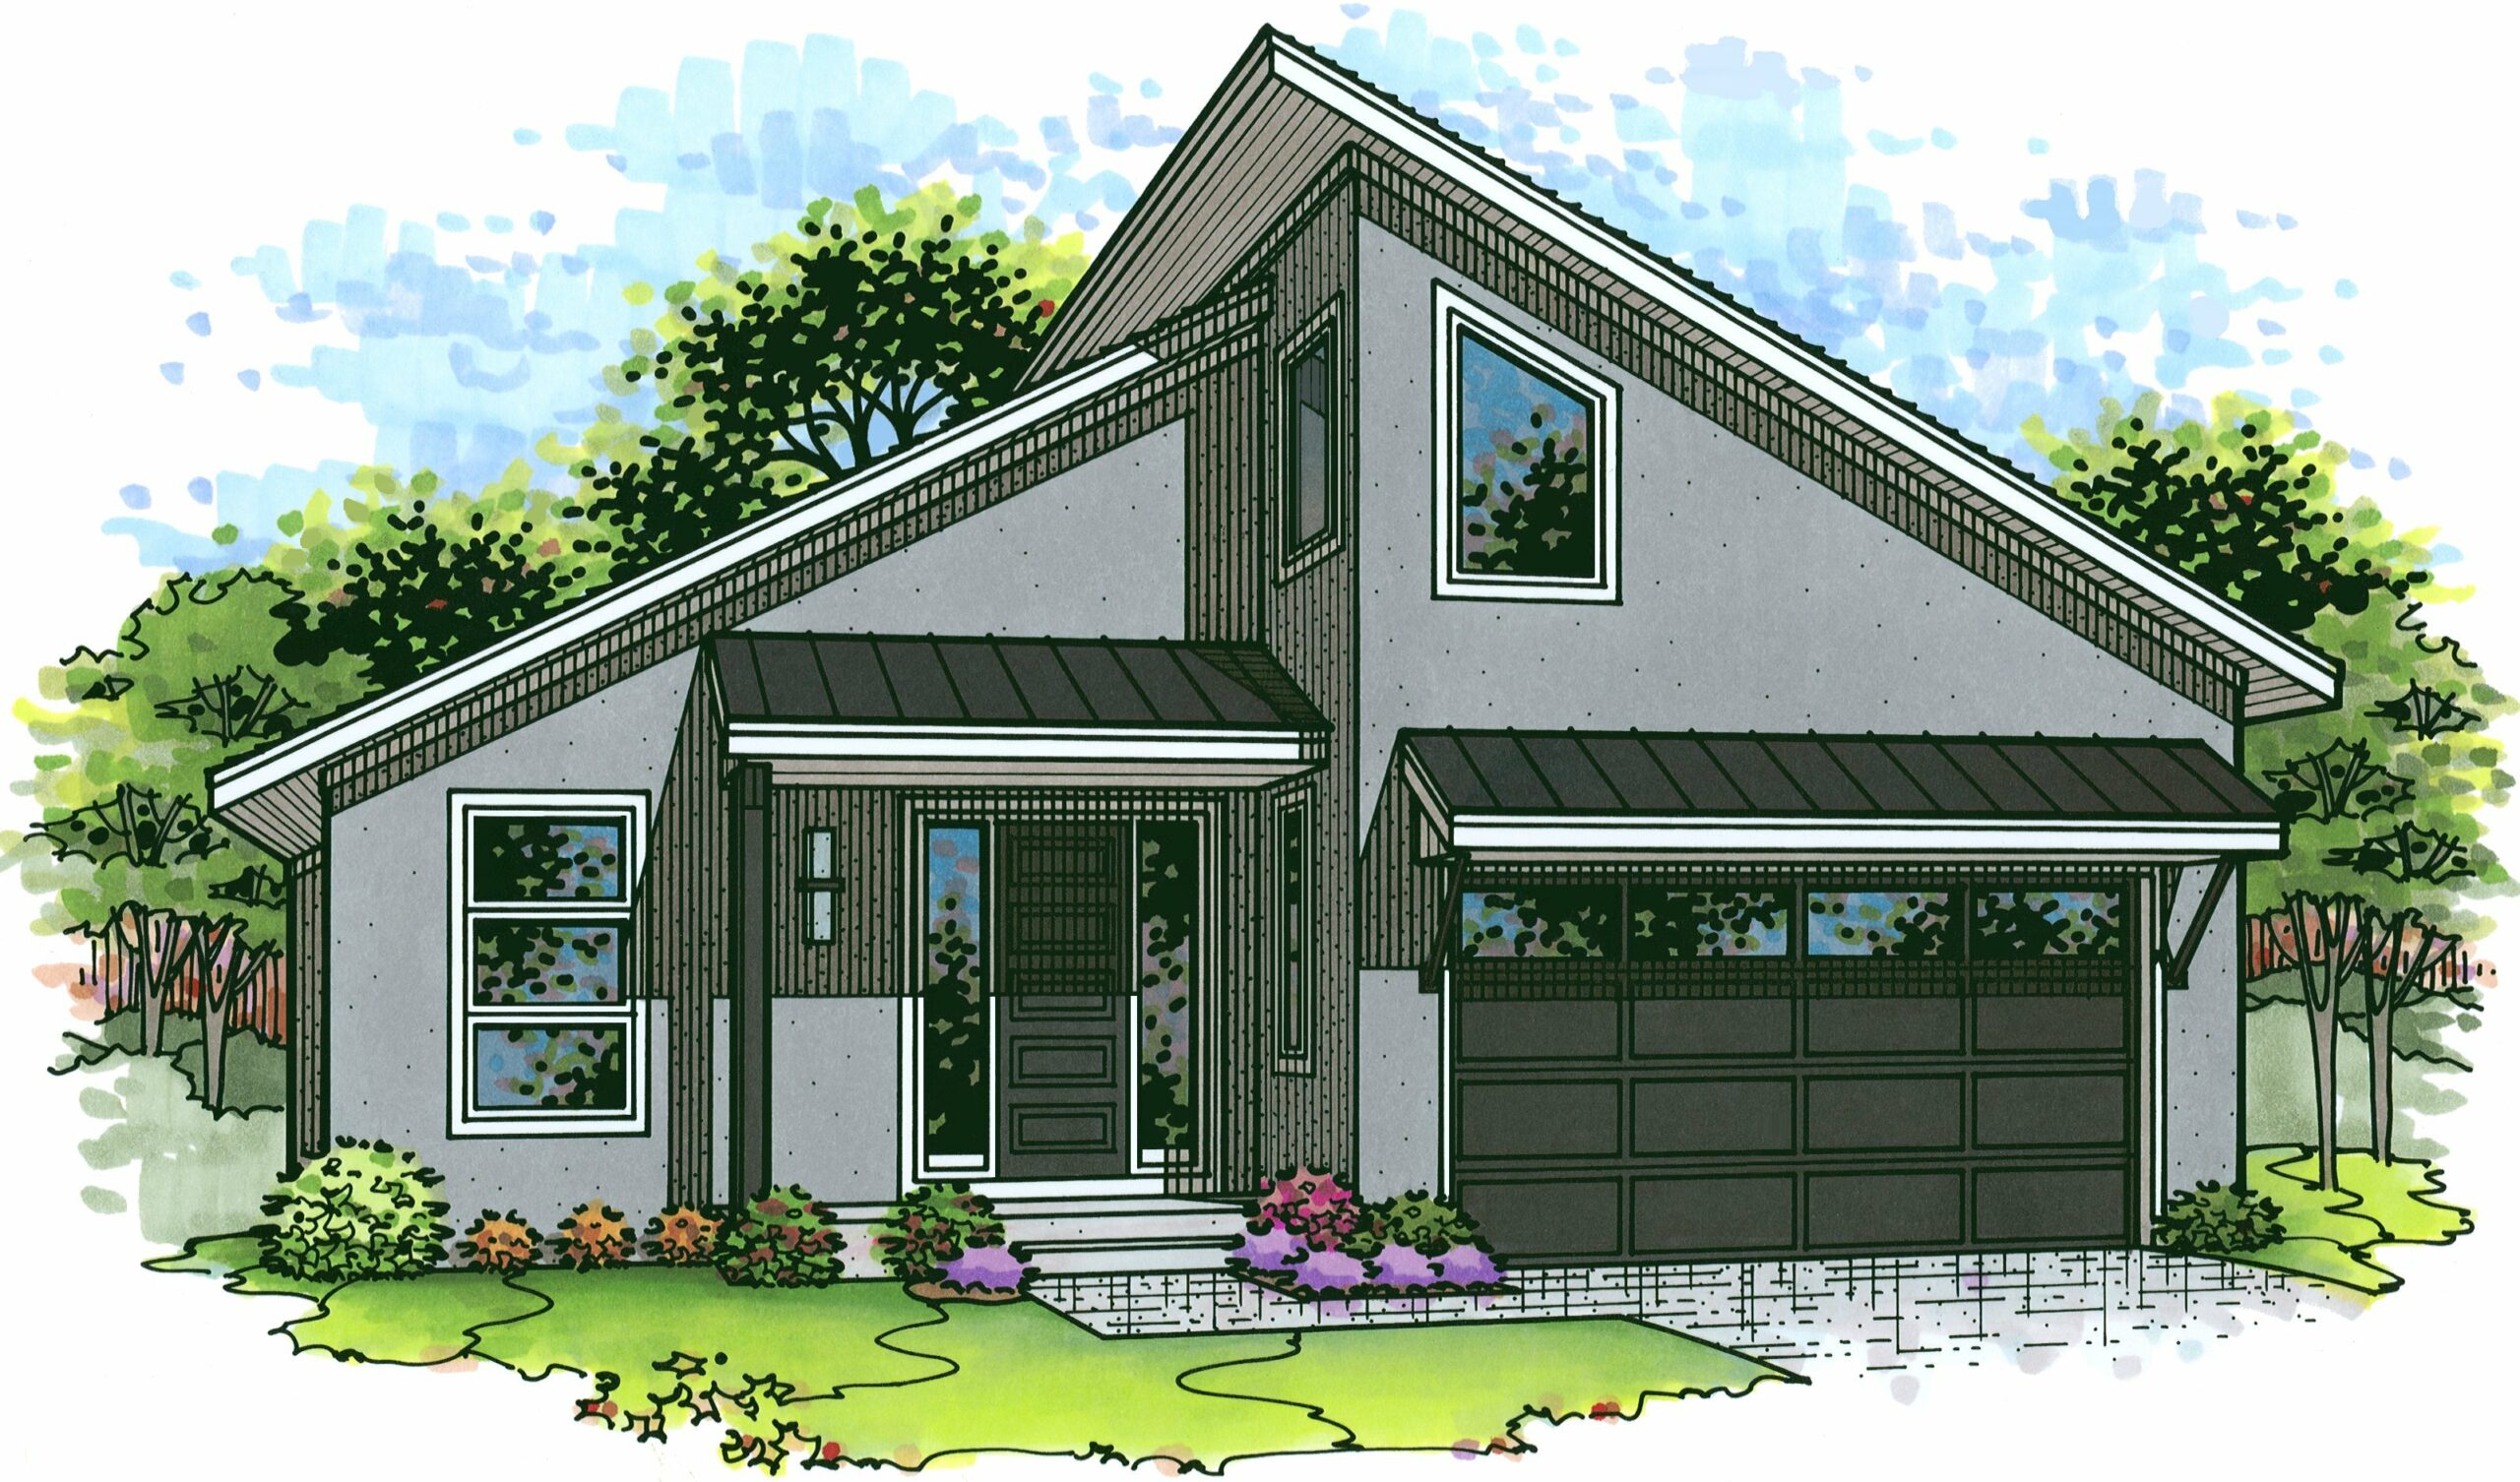 Rendering of the front elevation of the holly model from Lambie Homes